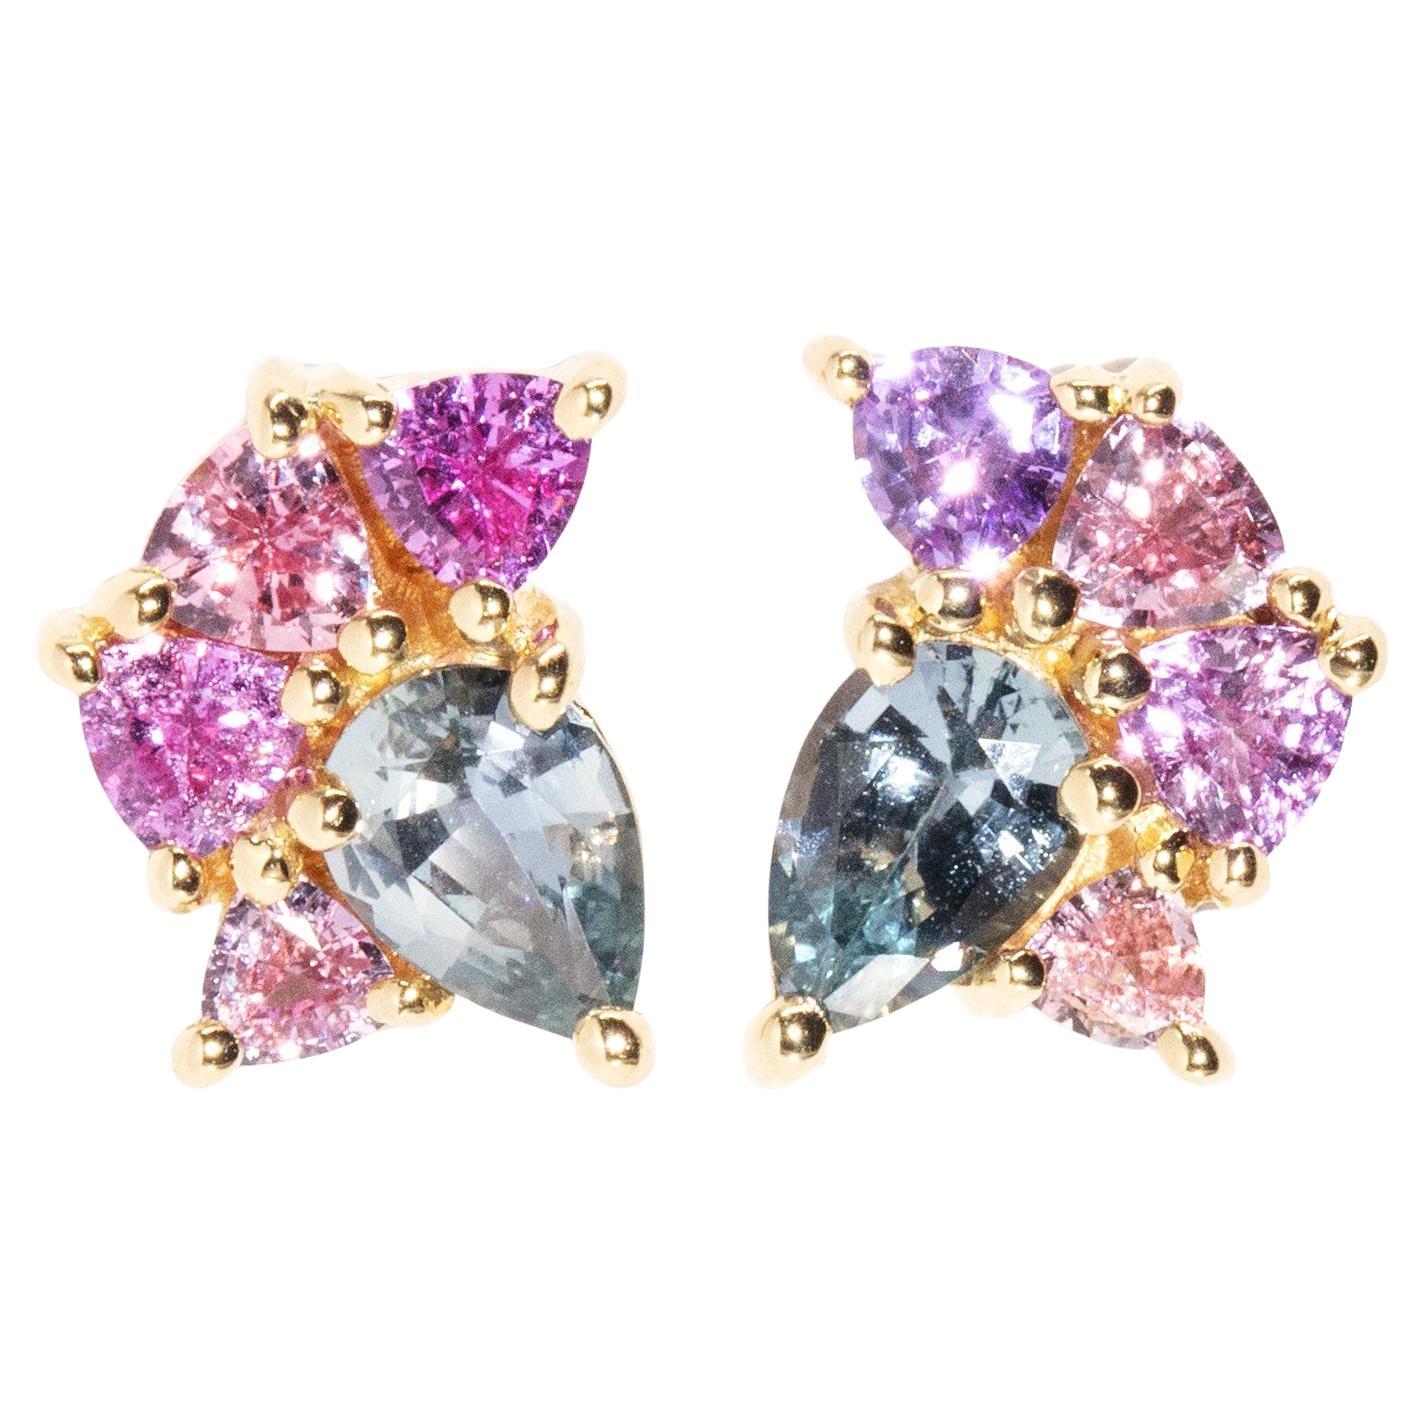 "Hope's Embrace" 2.55 Carat Ceylon Sapphire Cluster Studs 18 Carat Yellow Gold For Sale